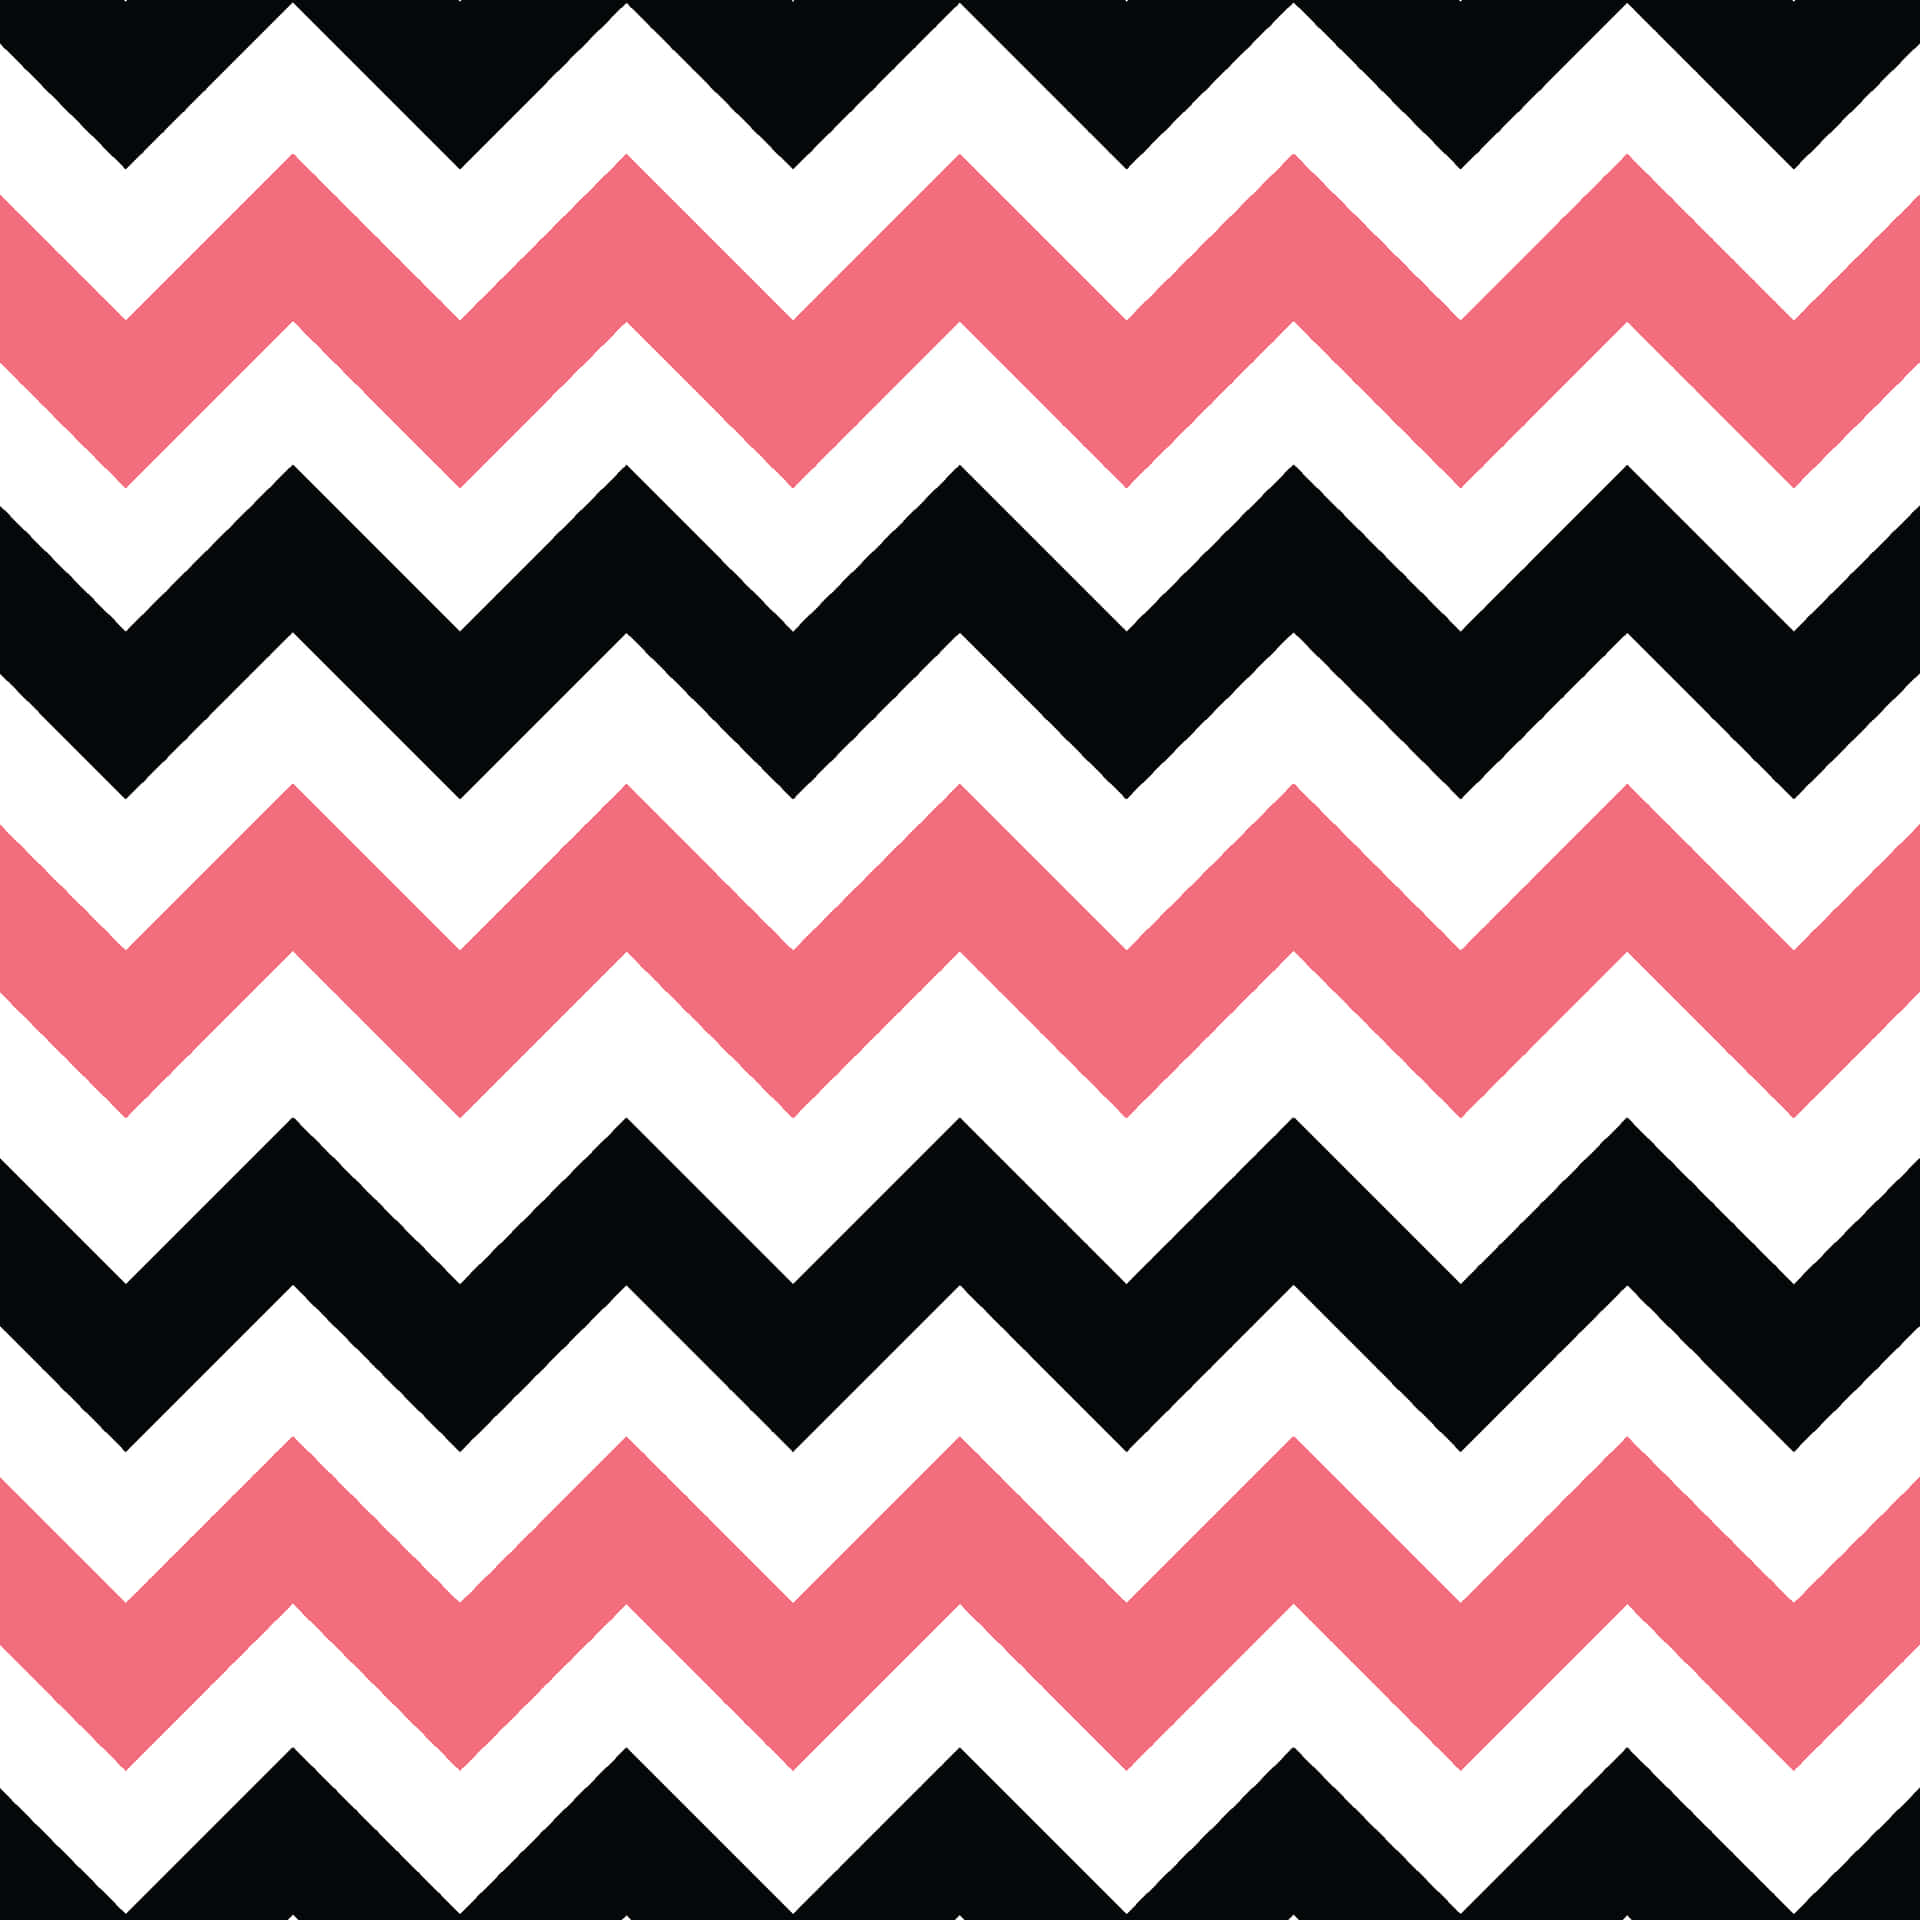 Abstract geometric pattern in pink, black and white. Wallpaper